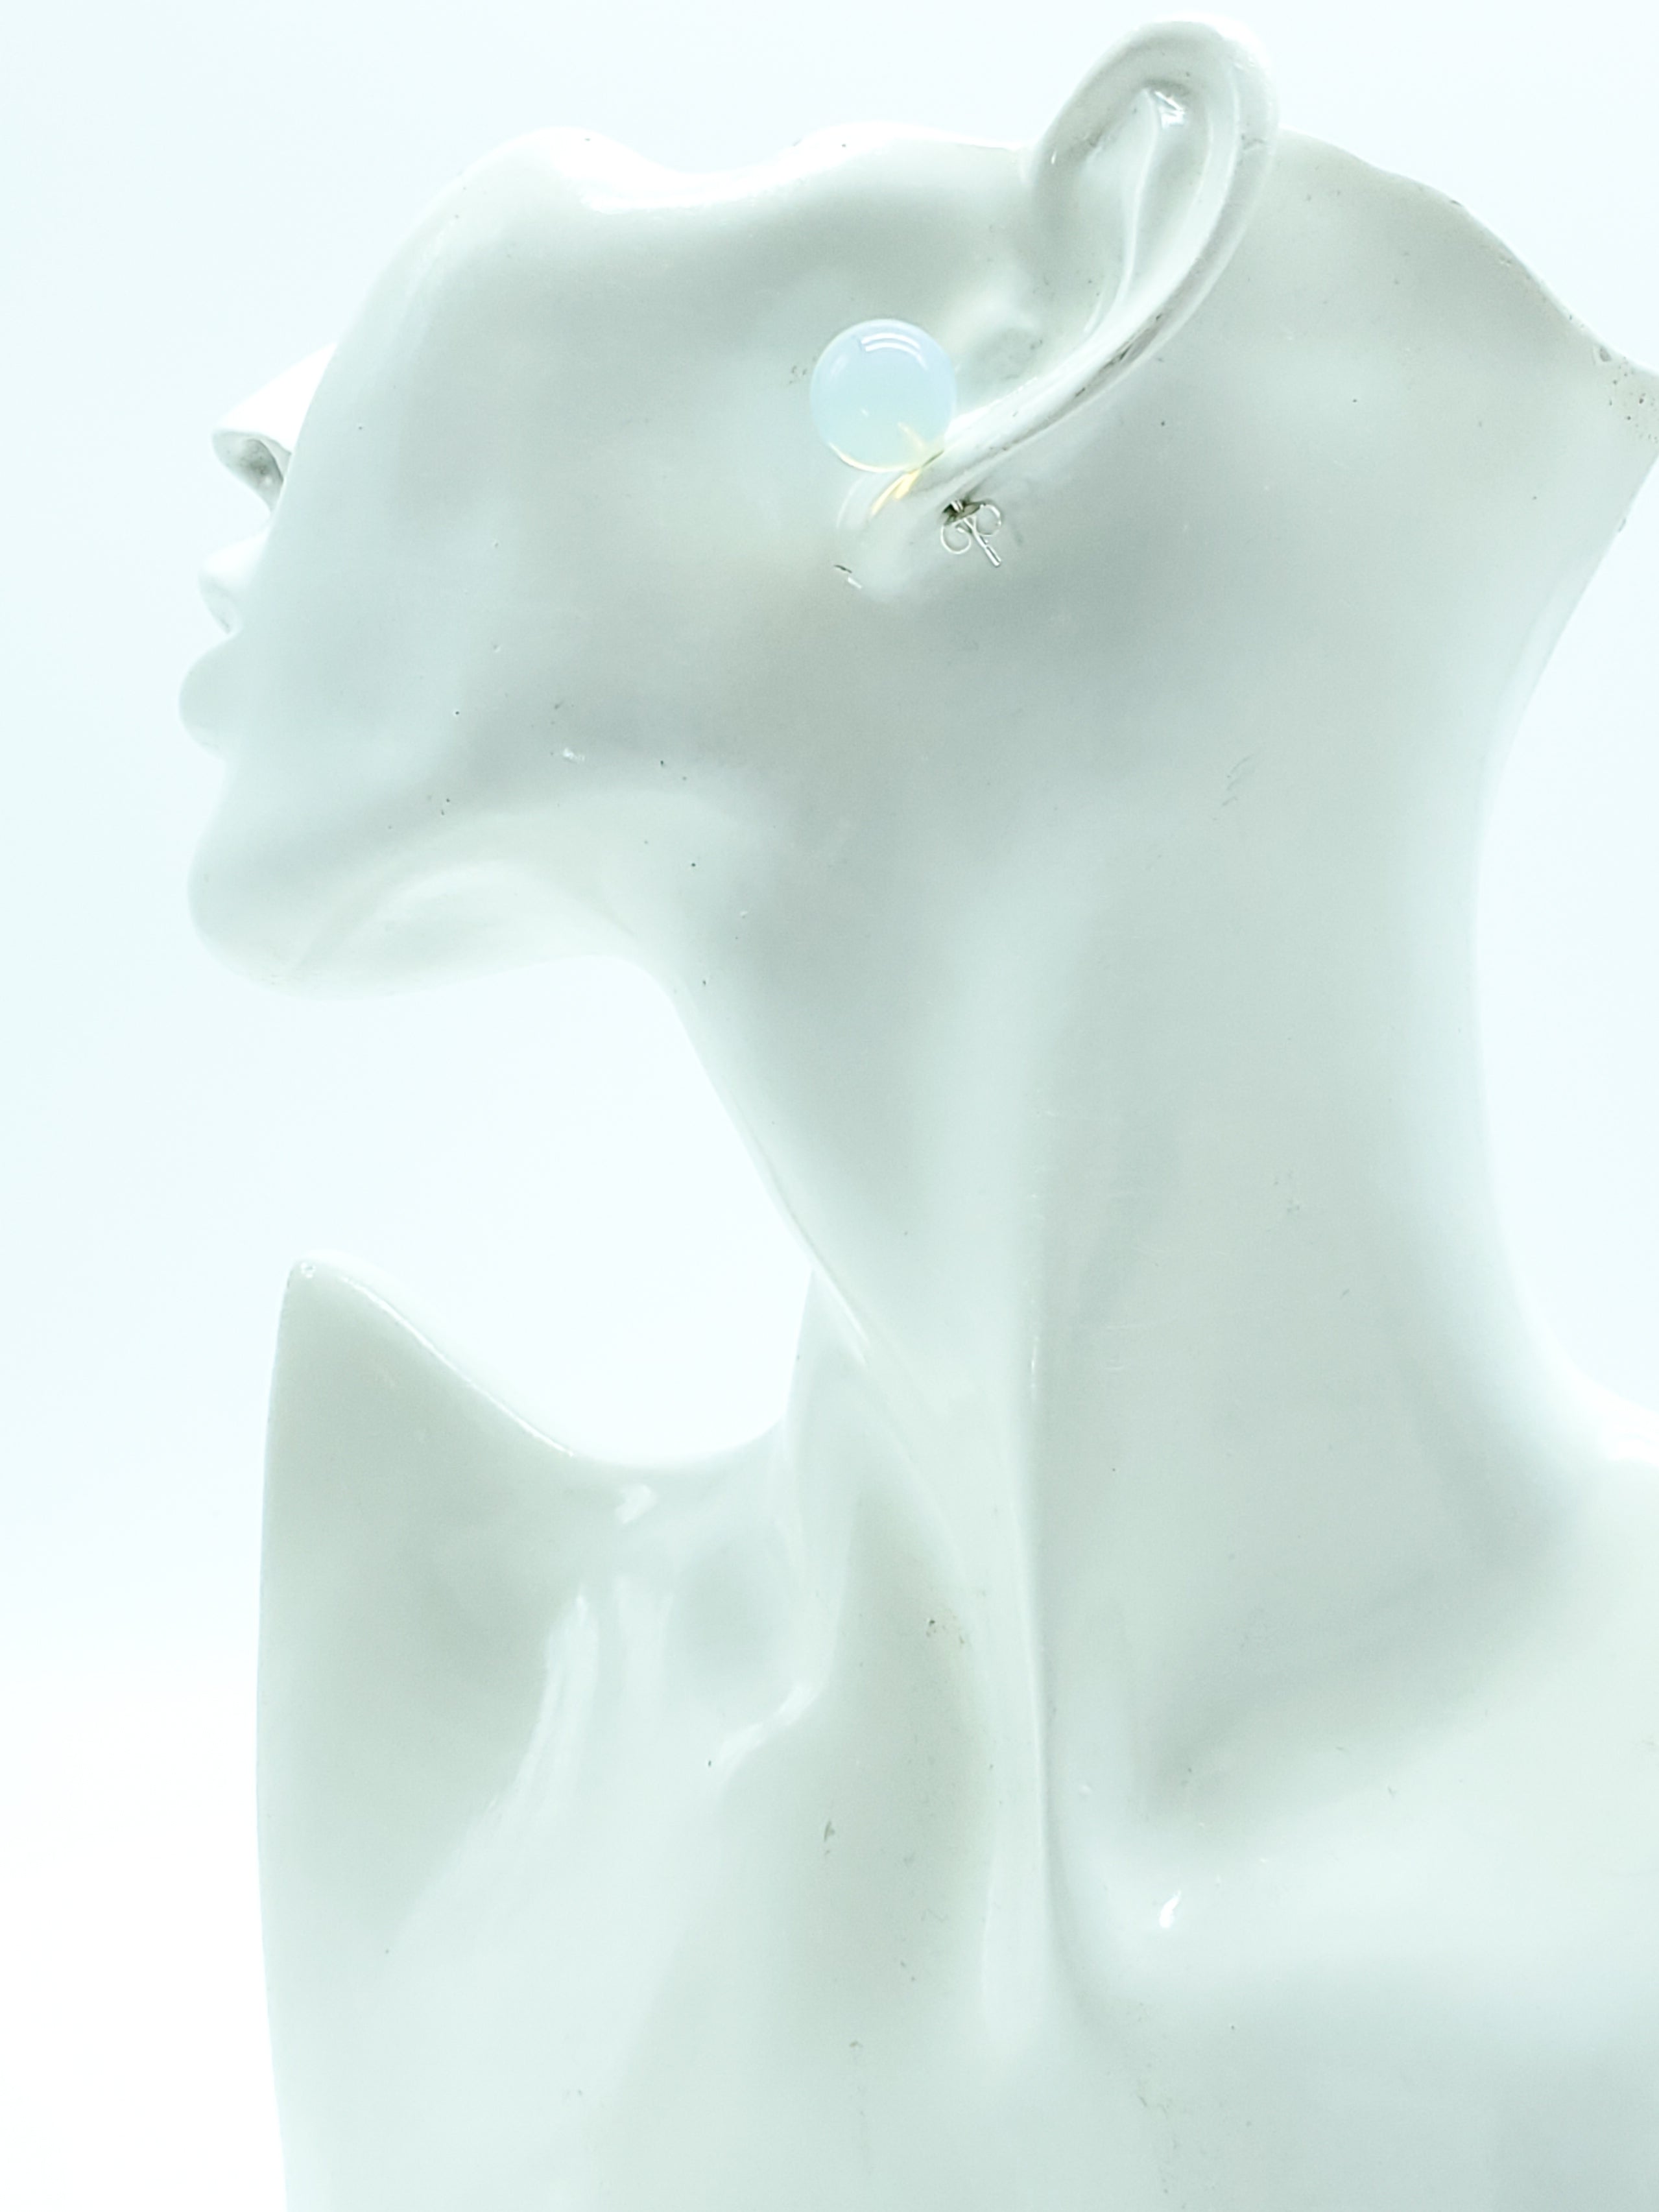 Opalite Earrings on Sterling Silver Studs - The Caffeinated Raven